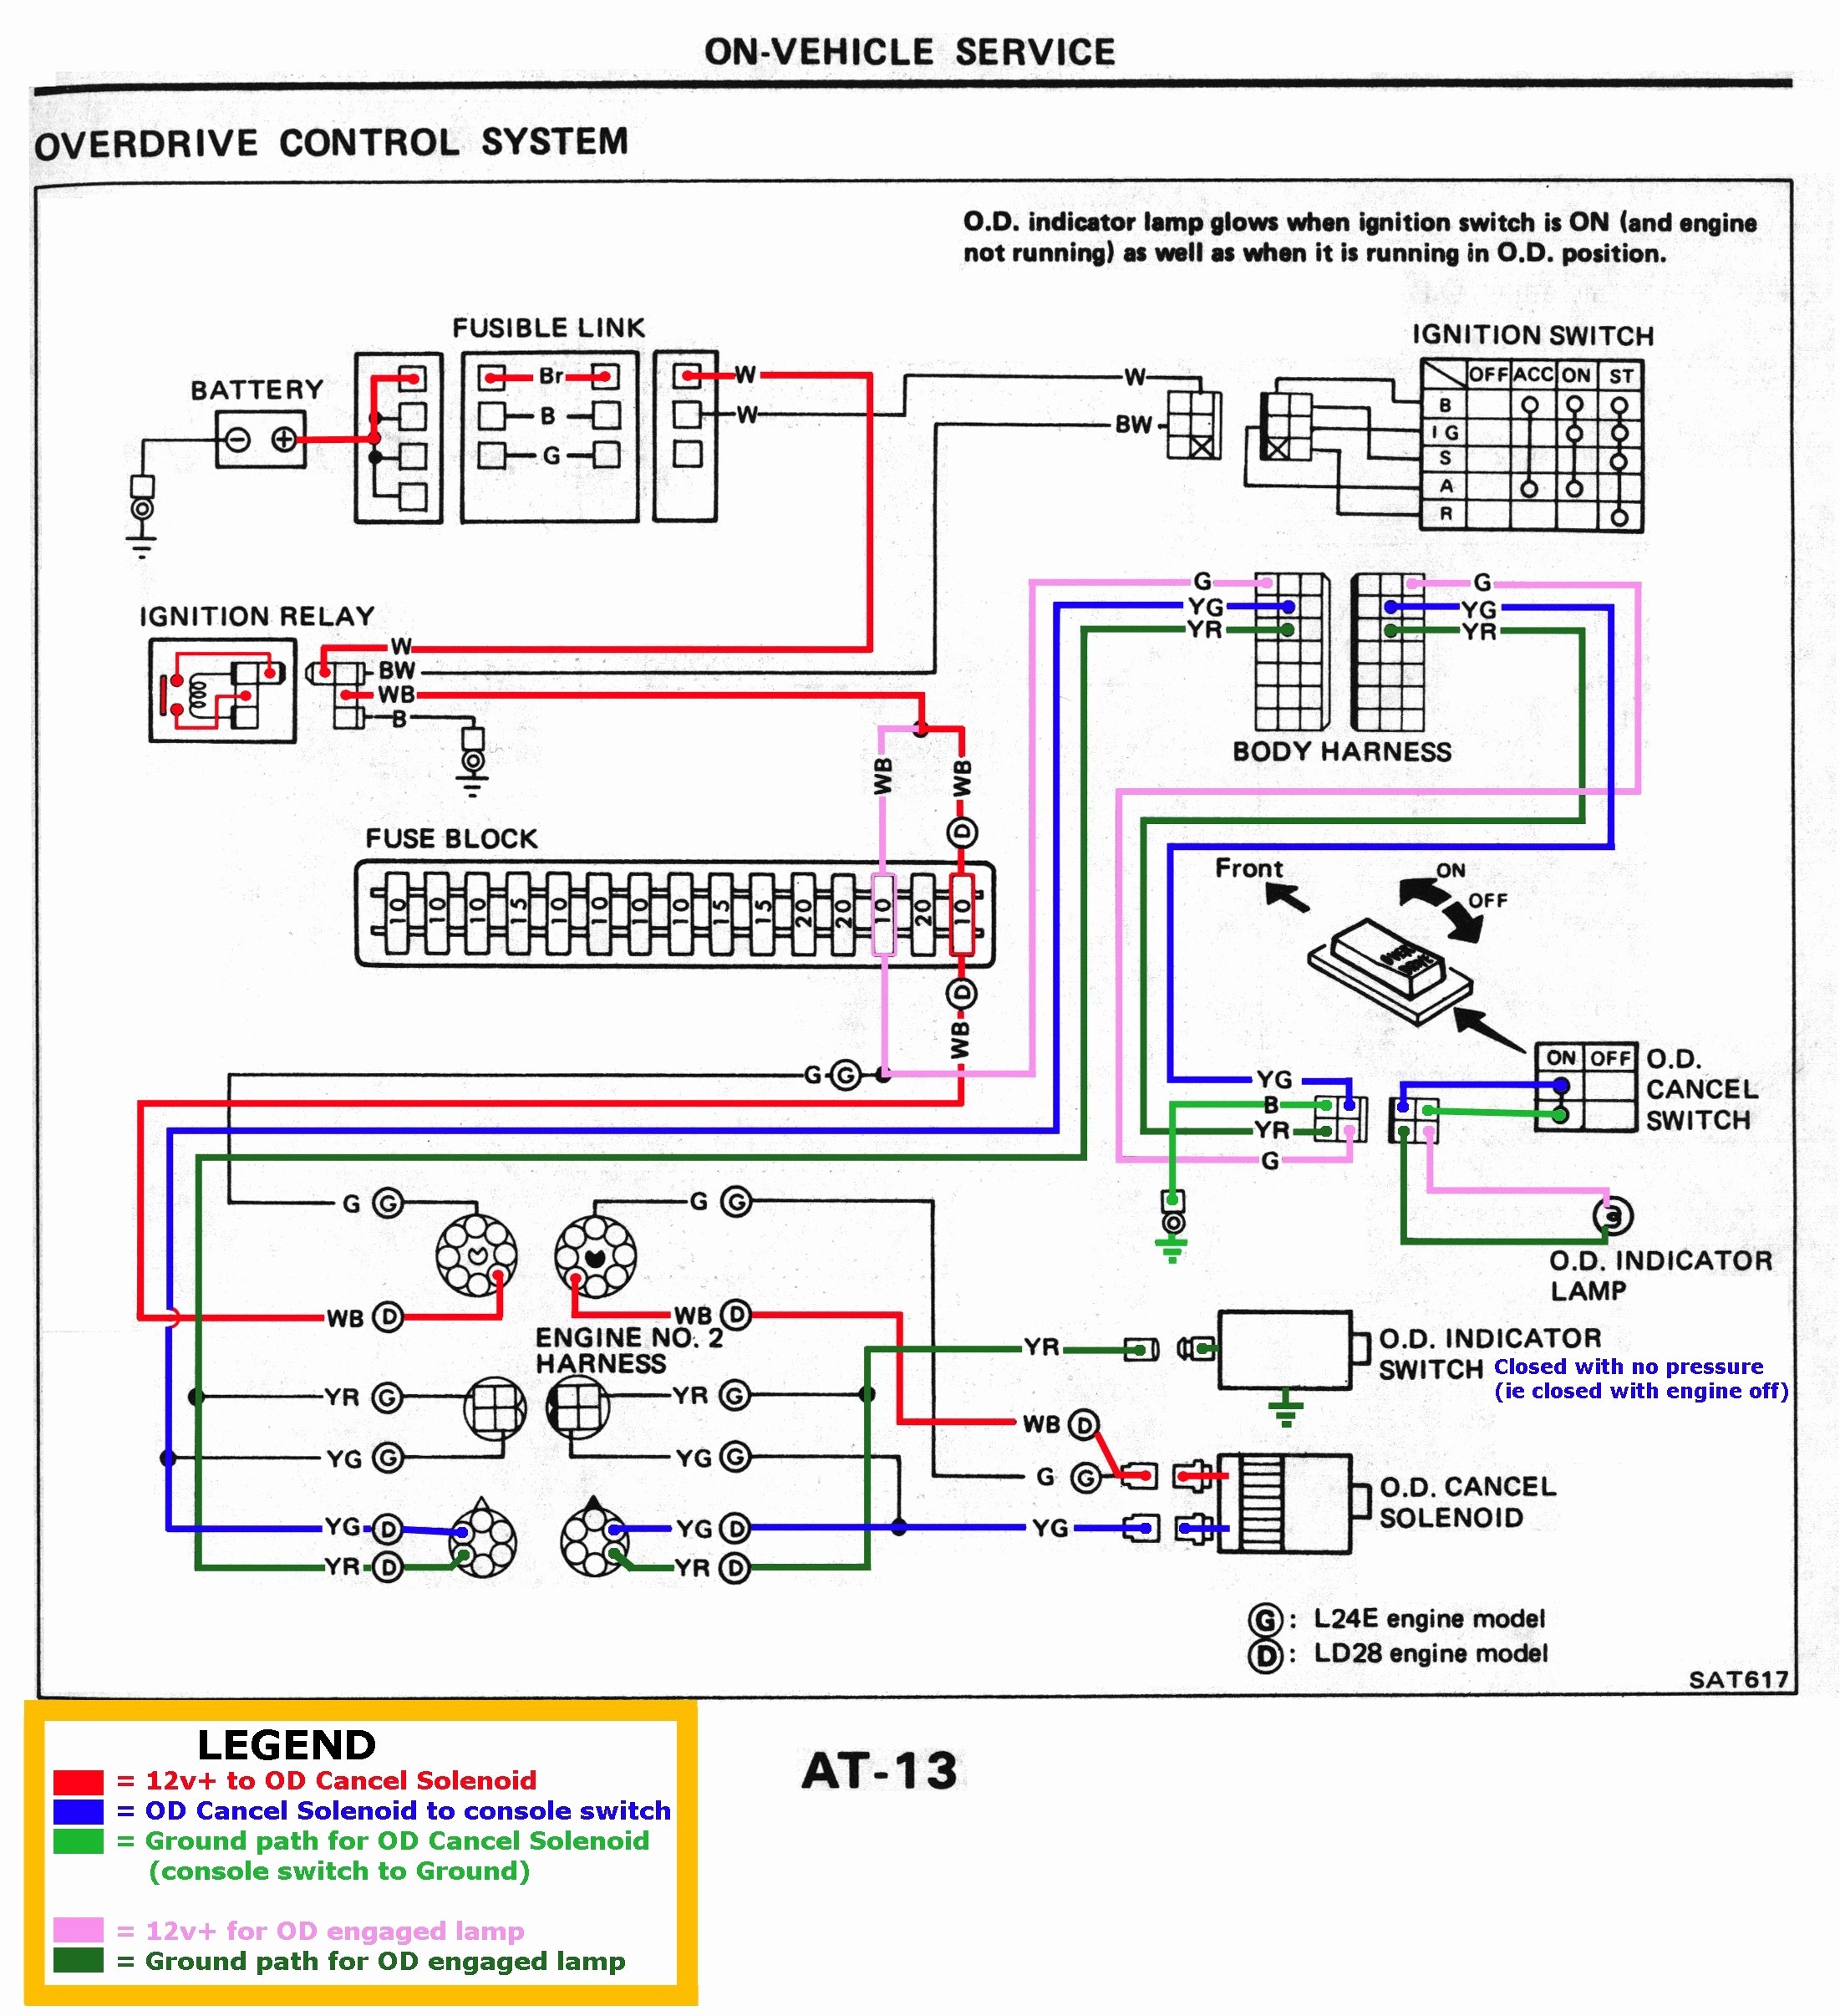 Wiring Diagram for Distributor Fresh Wiring Diagram Wiring A Light Switch Diagram Lovely How to Wire